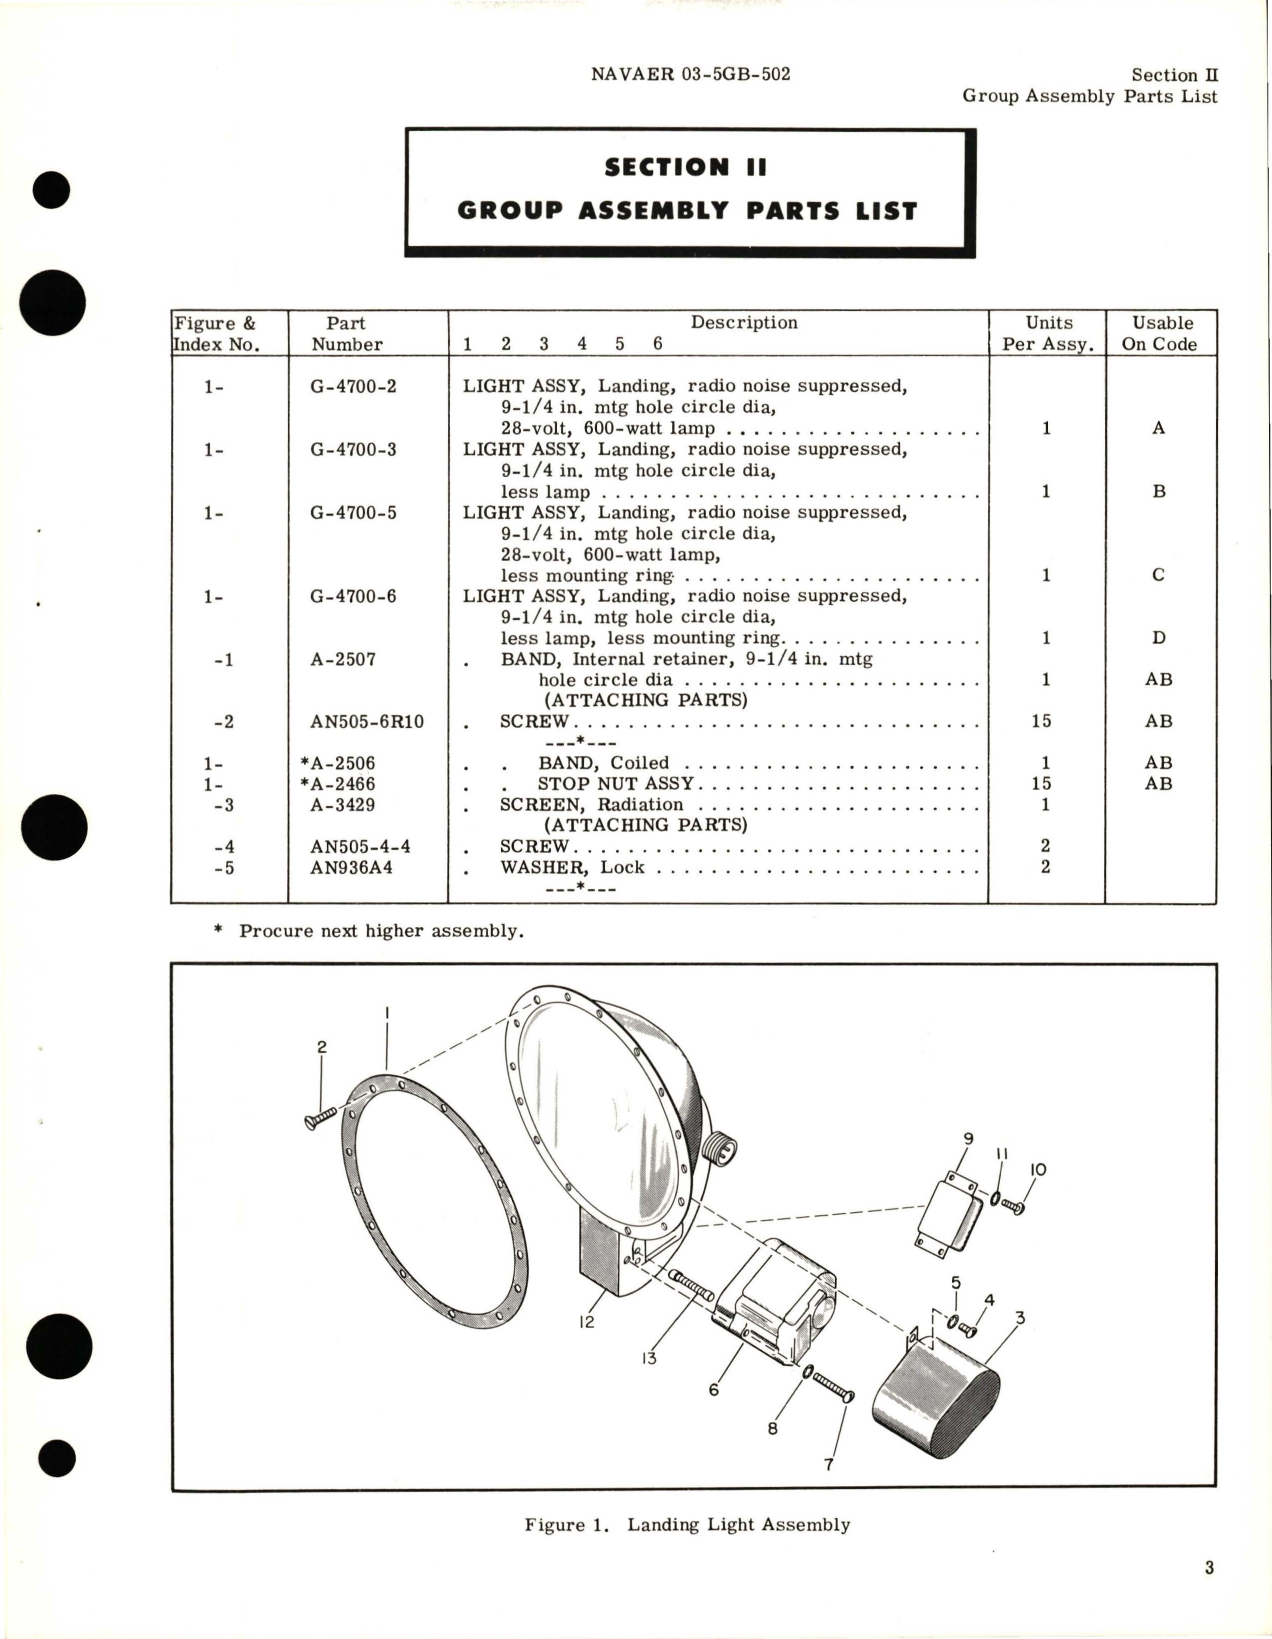 Sample page 7 from AirCorps Library document: Illustrated Parts Breakdown for Electrically Retractable Landing Lights - Parts G-4700-2, G-4700-3, G-4700-5, and G-4700-6 